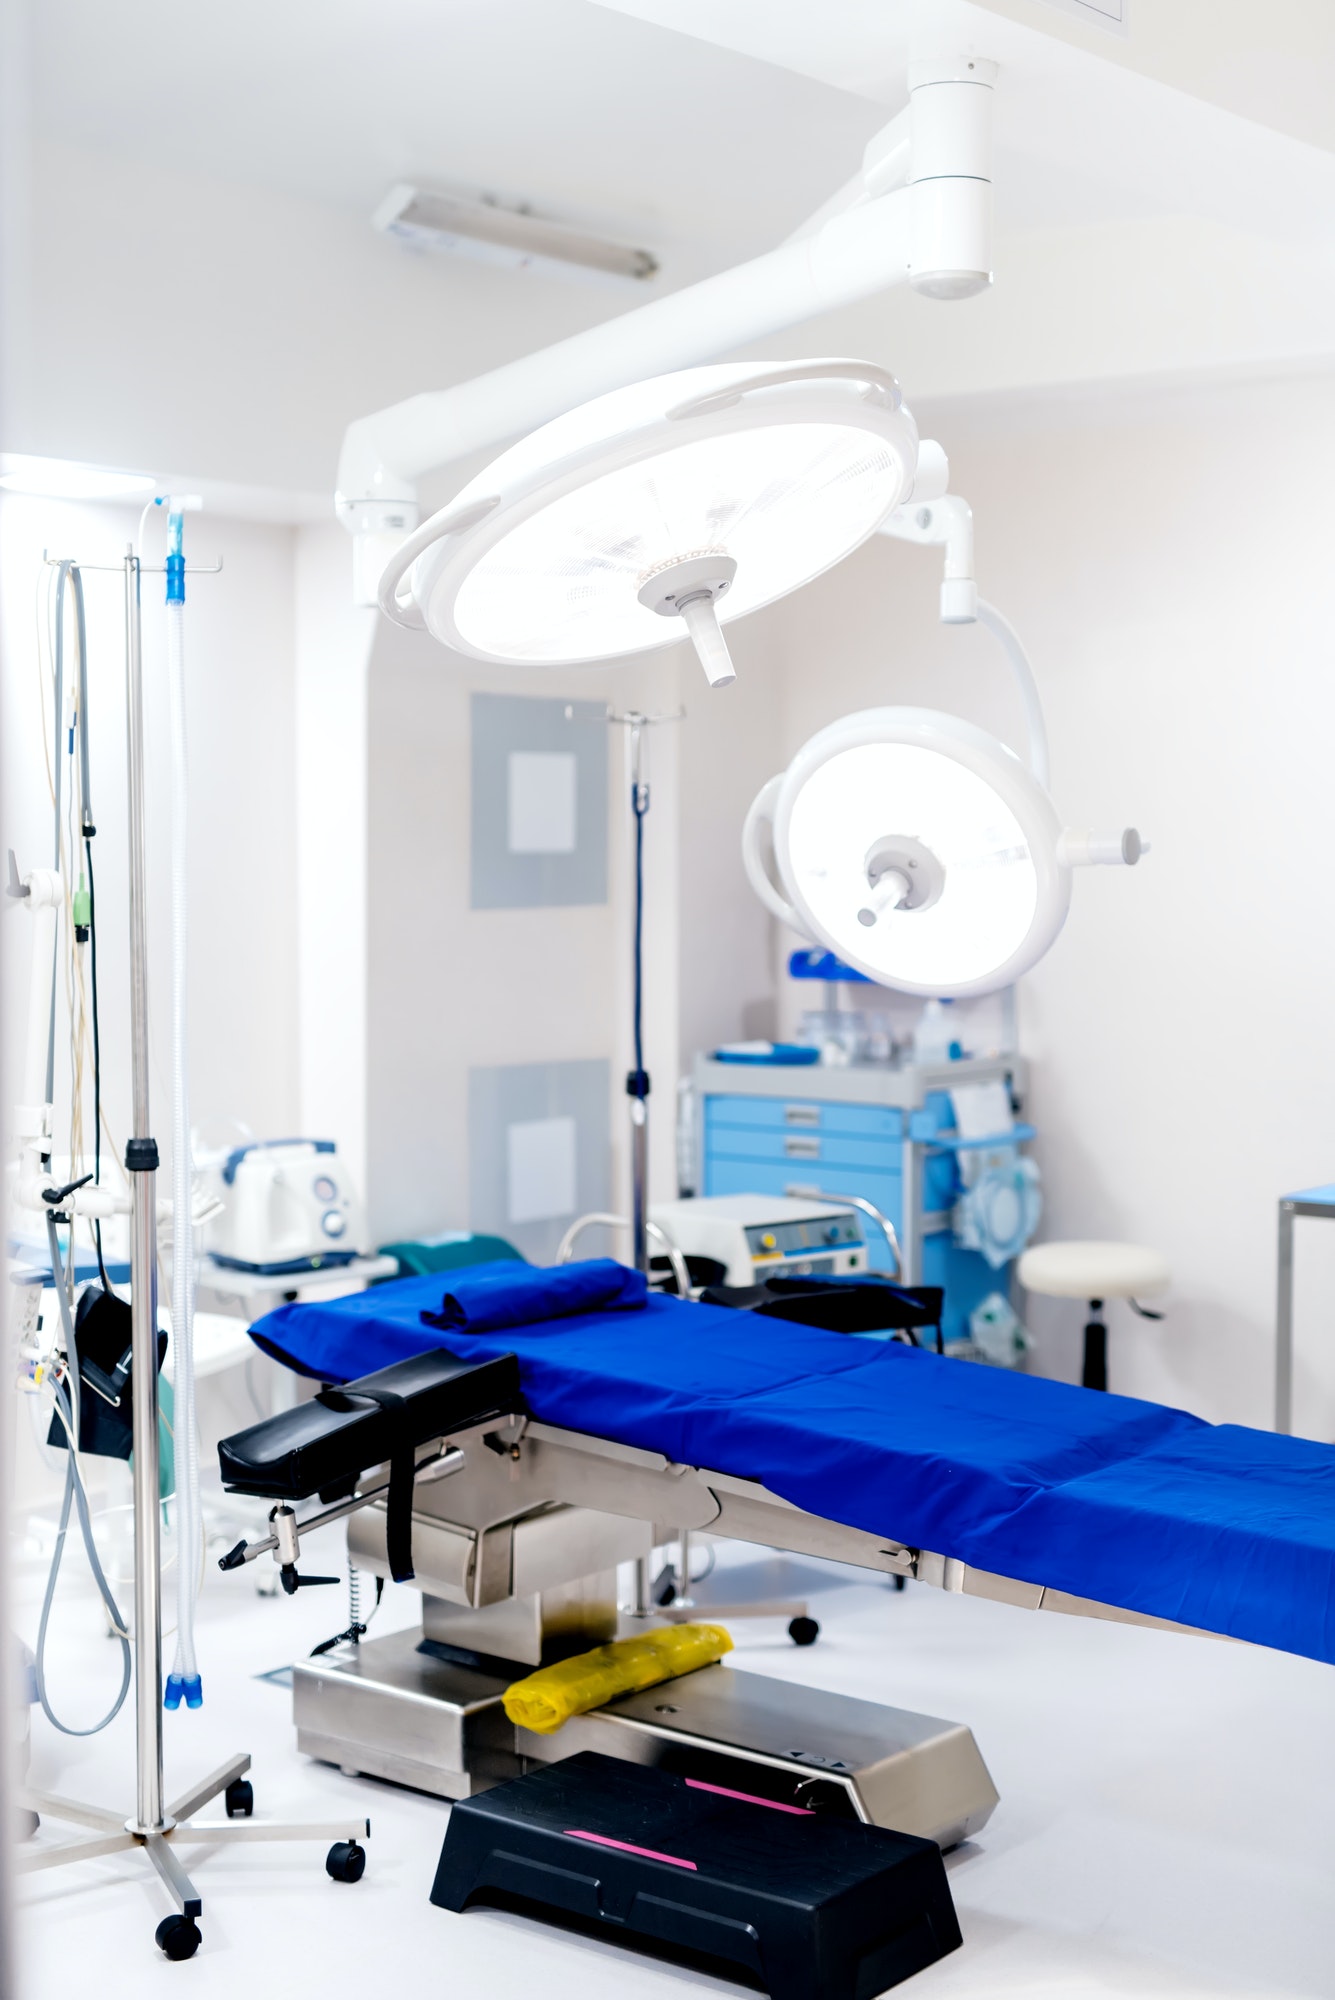 Medical equipment and modern devices in surgical room.